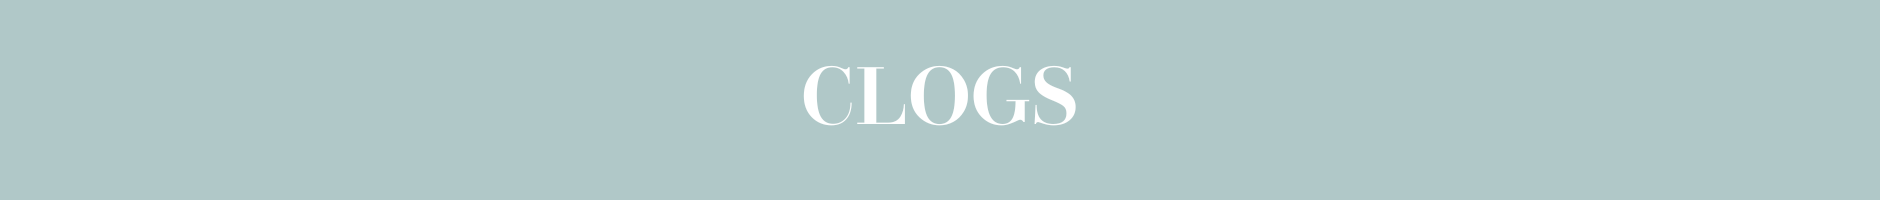 clogs-web-banner.png